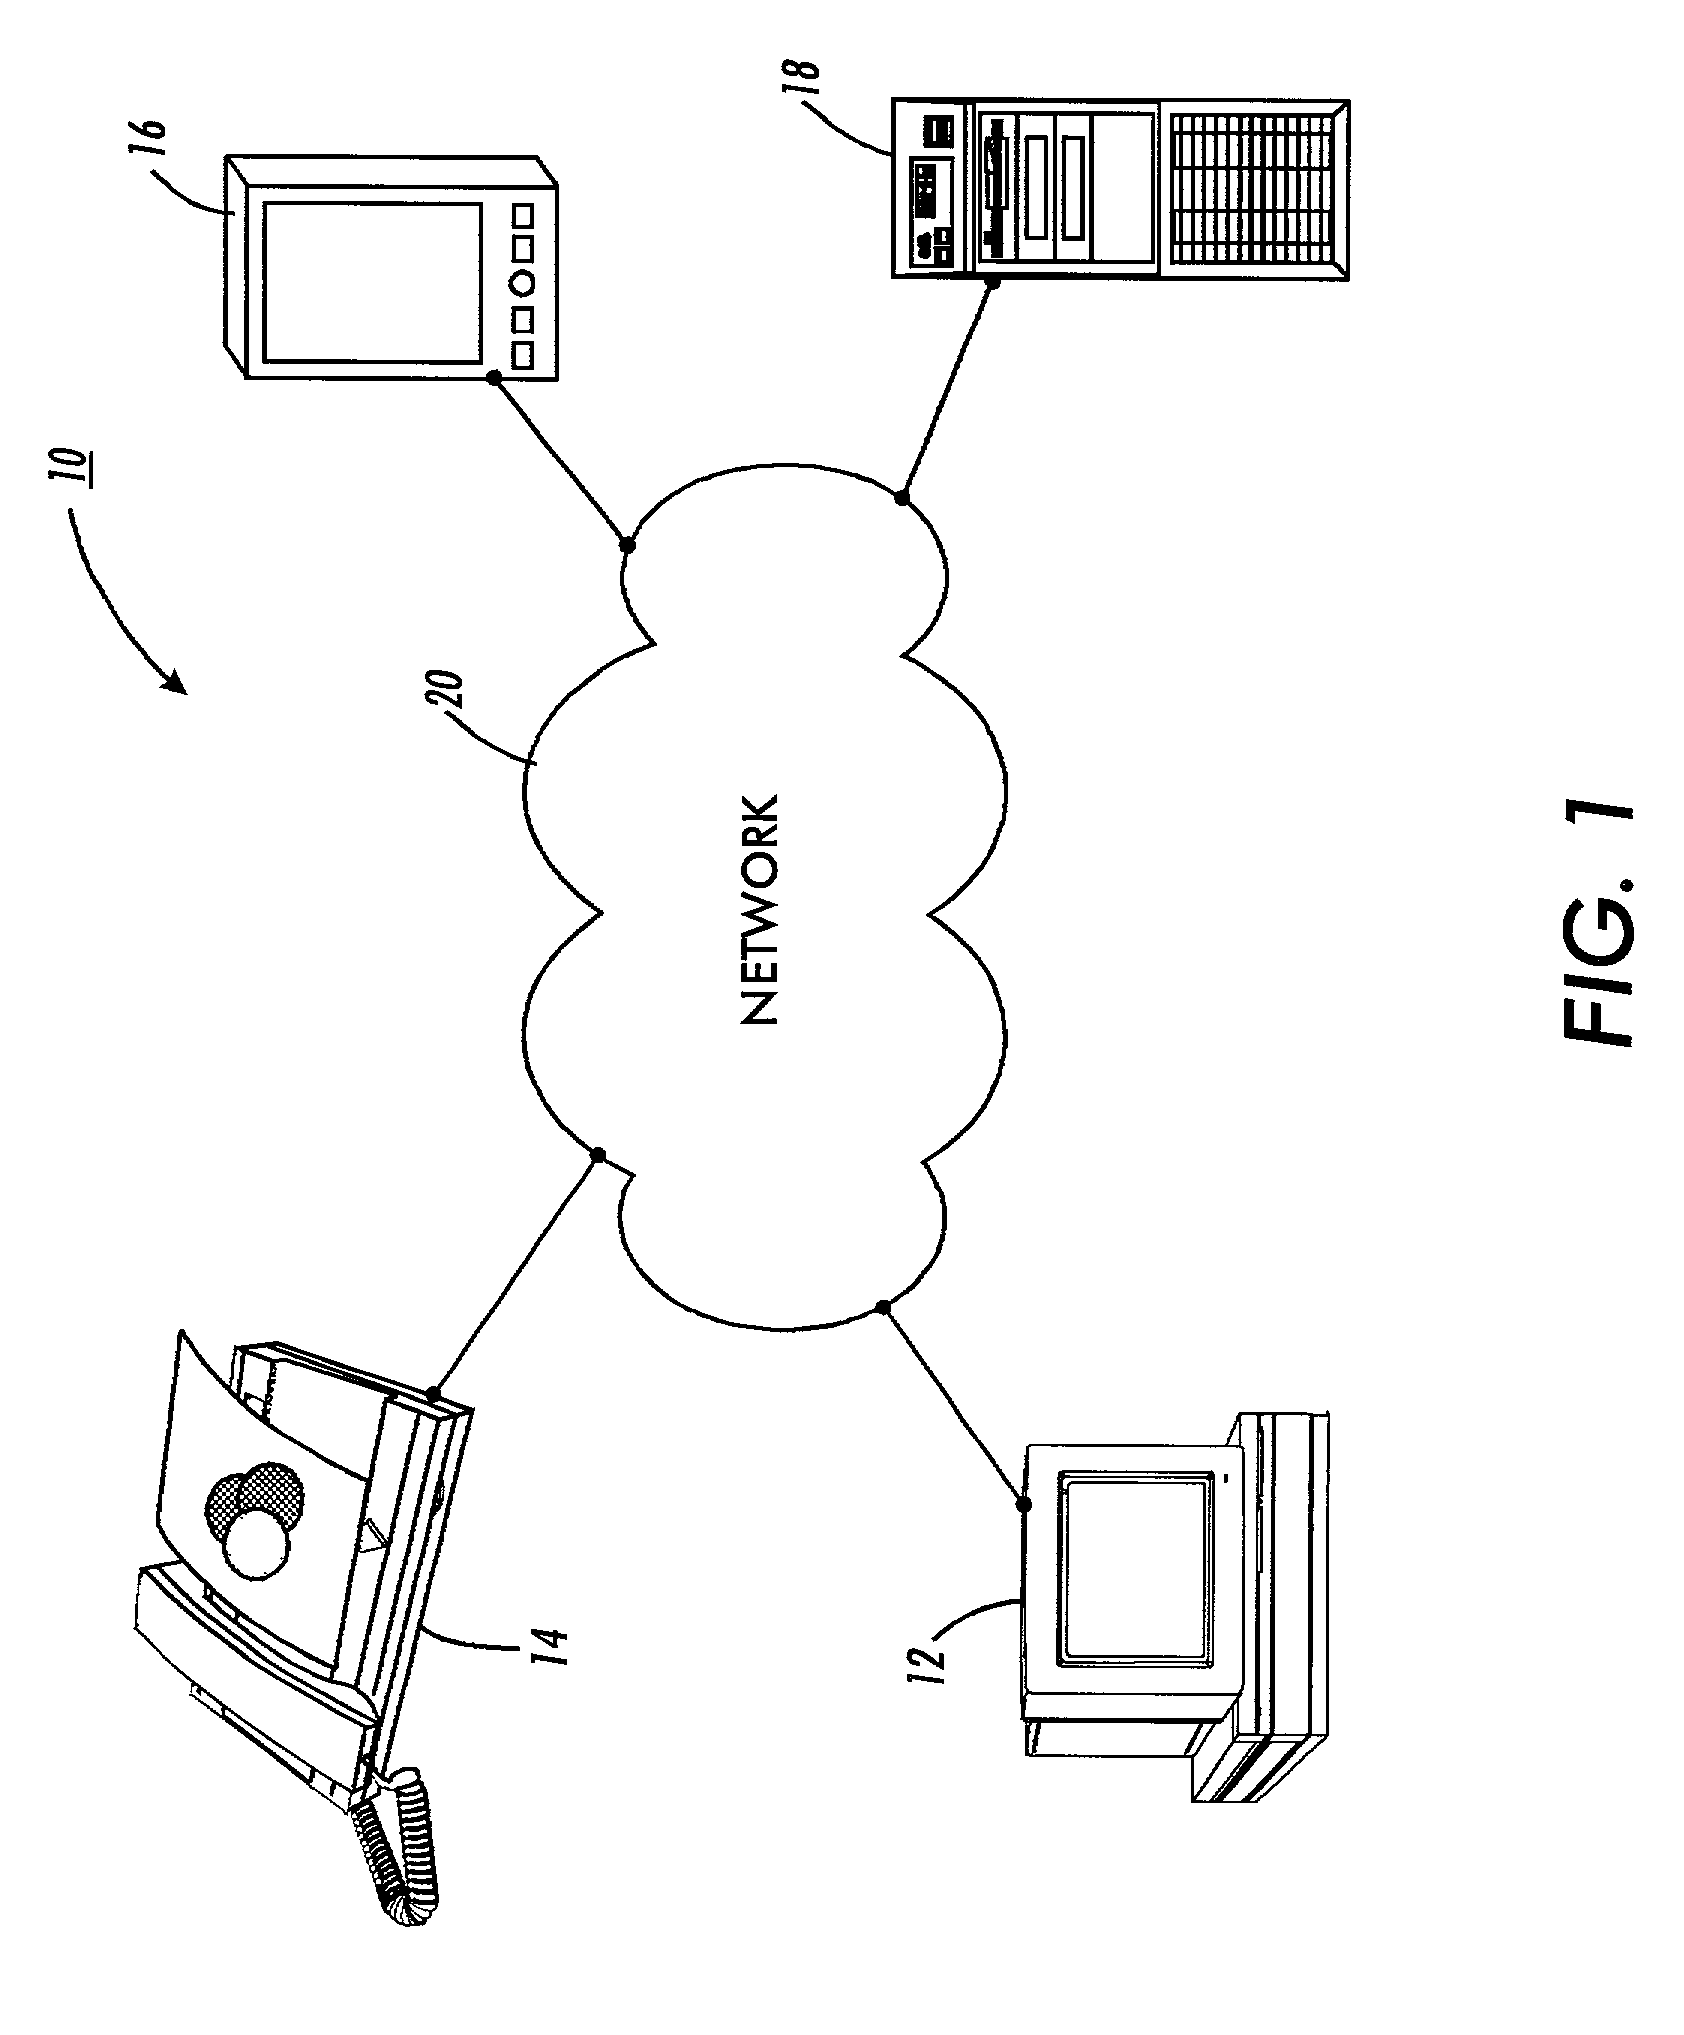 System and method for providing context information